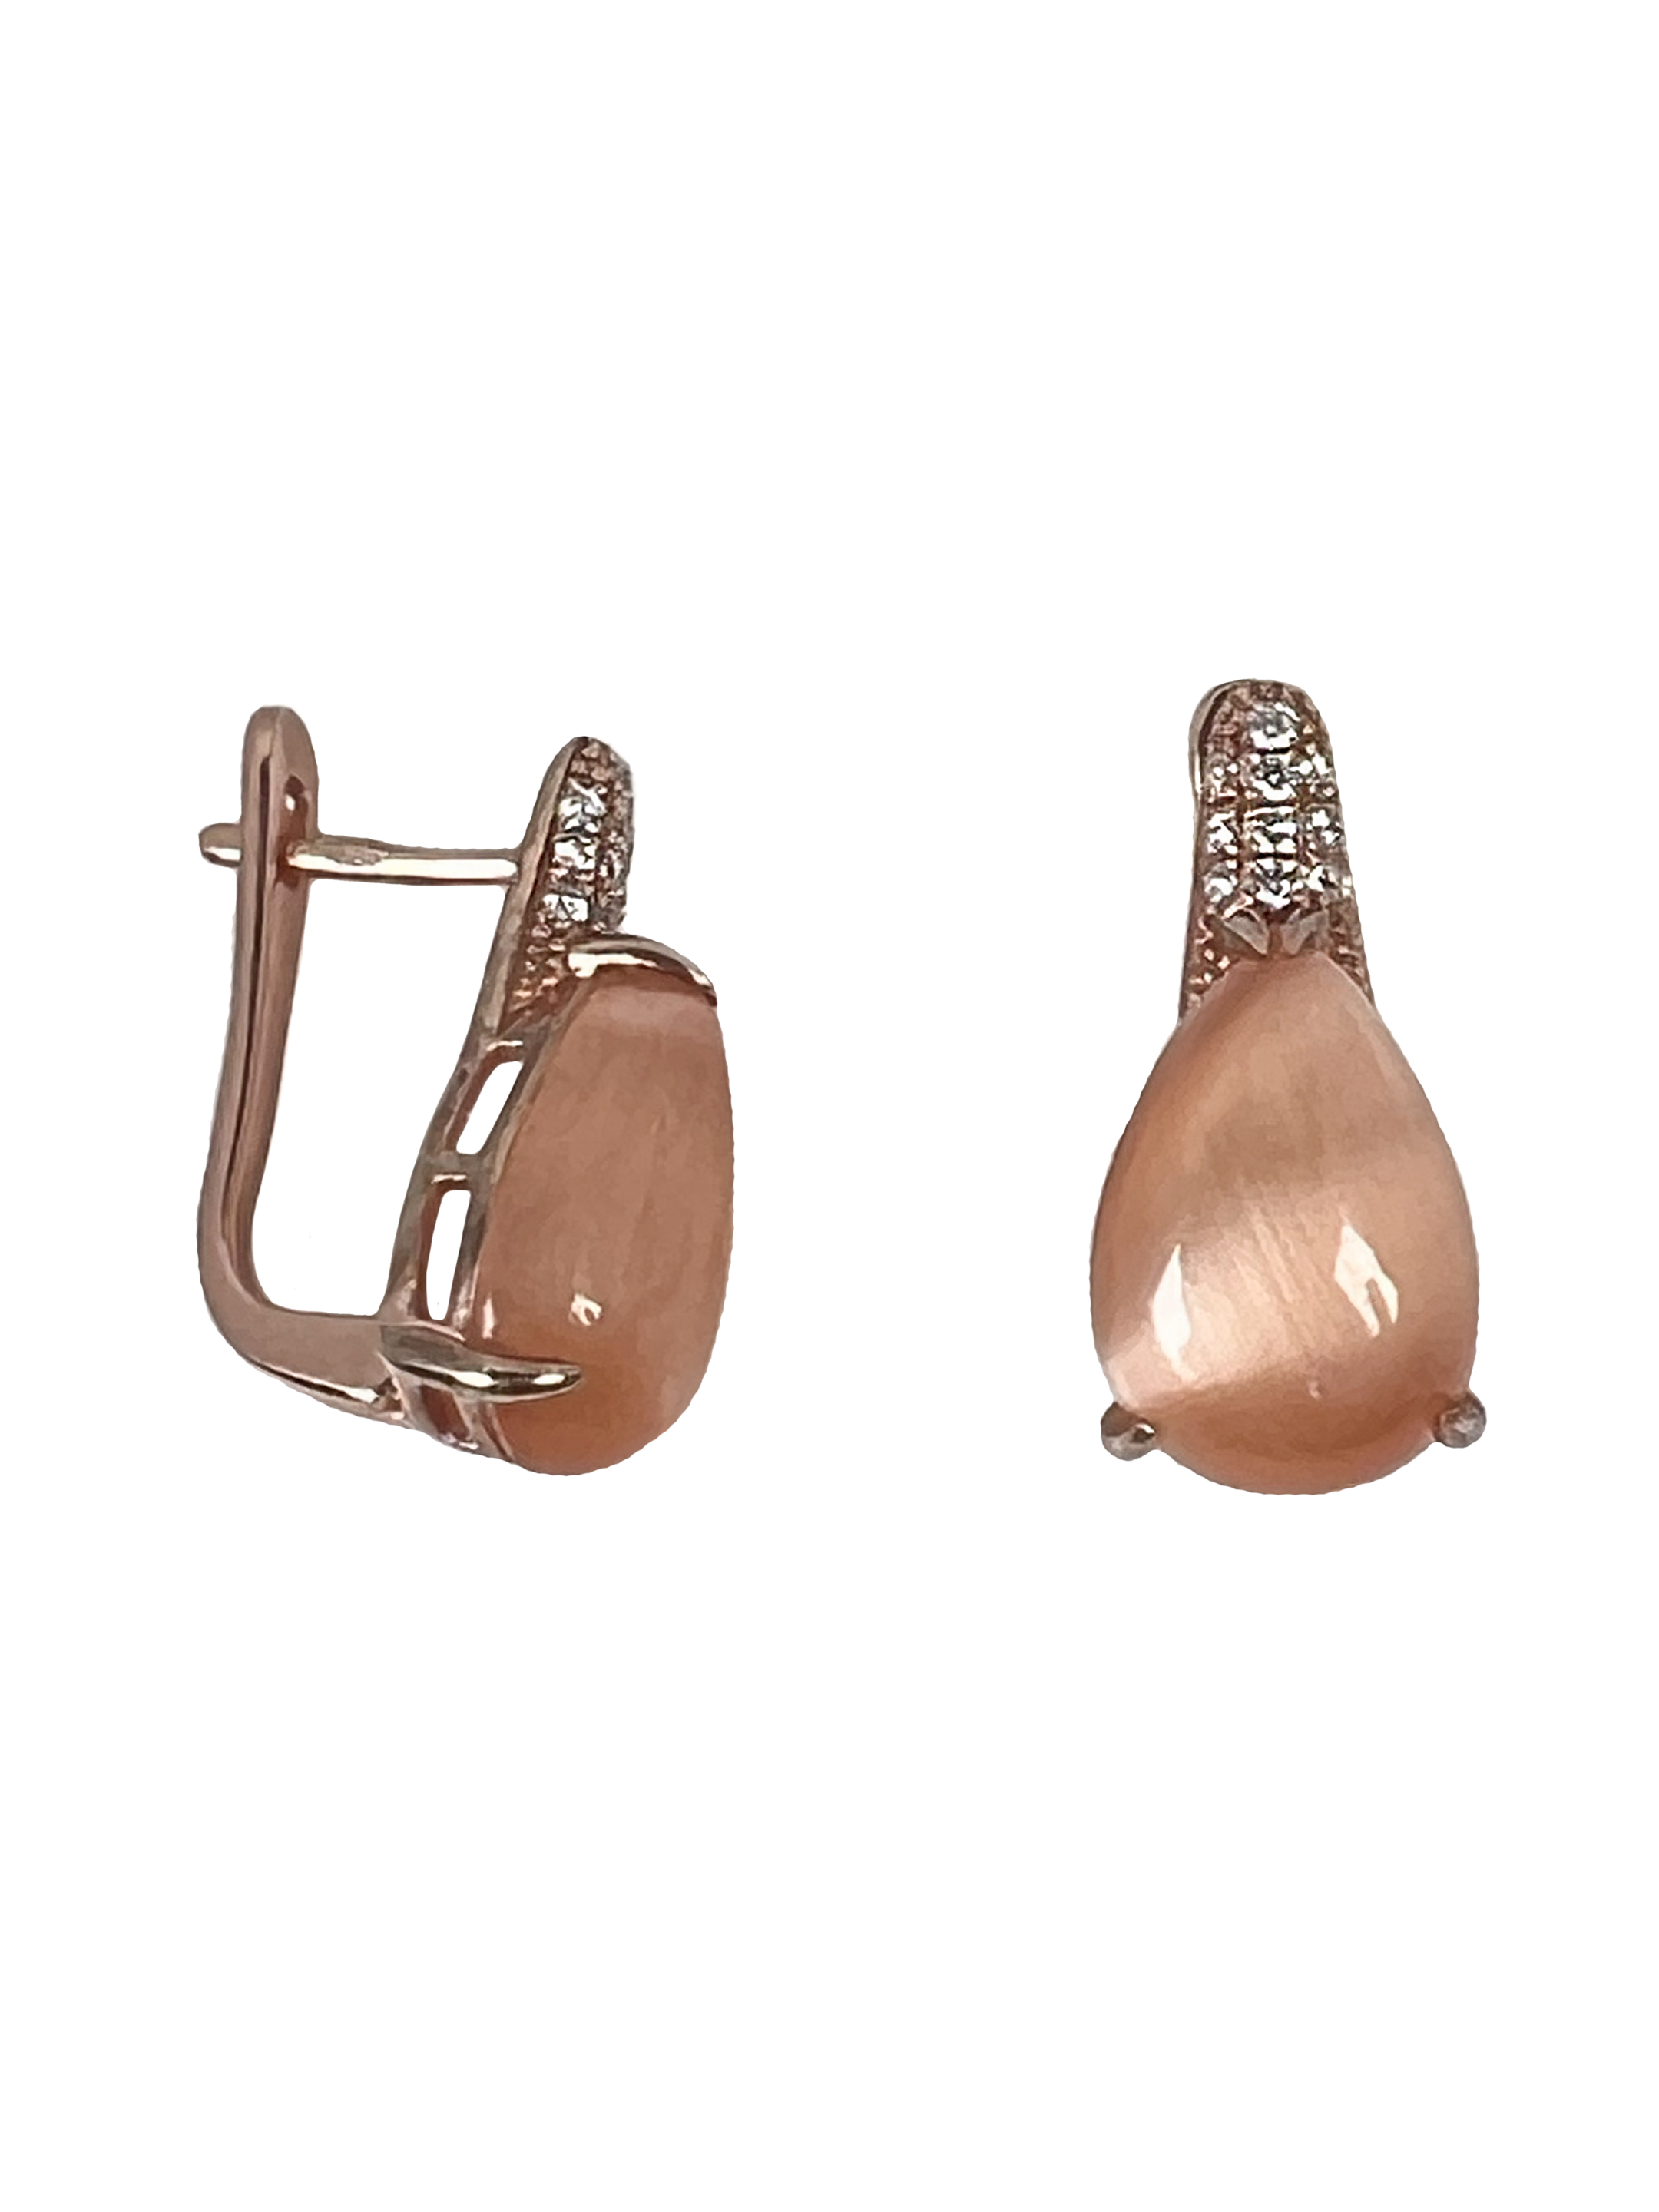 Silver earrings with surface treatment and pink stones